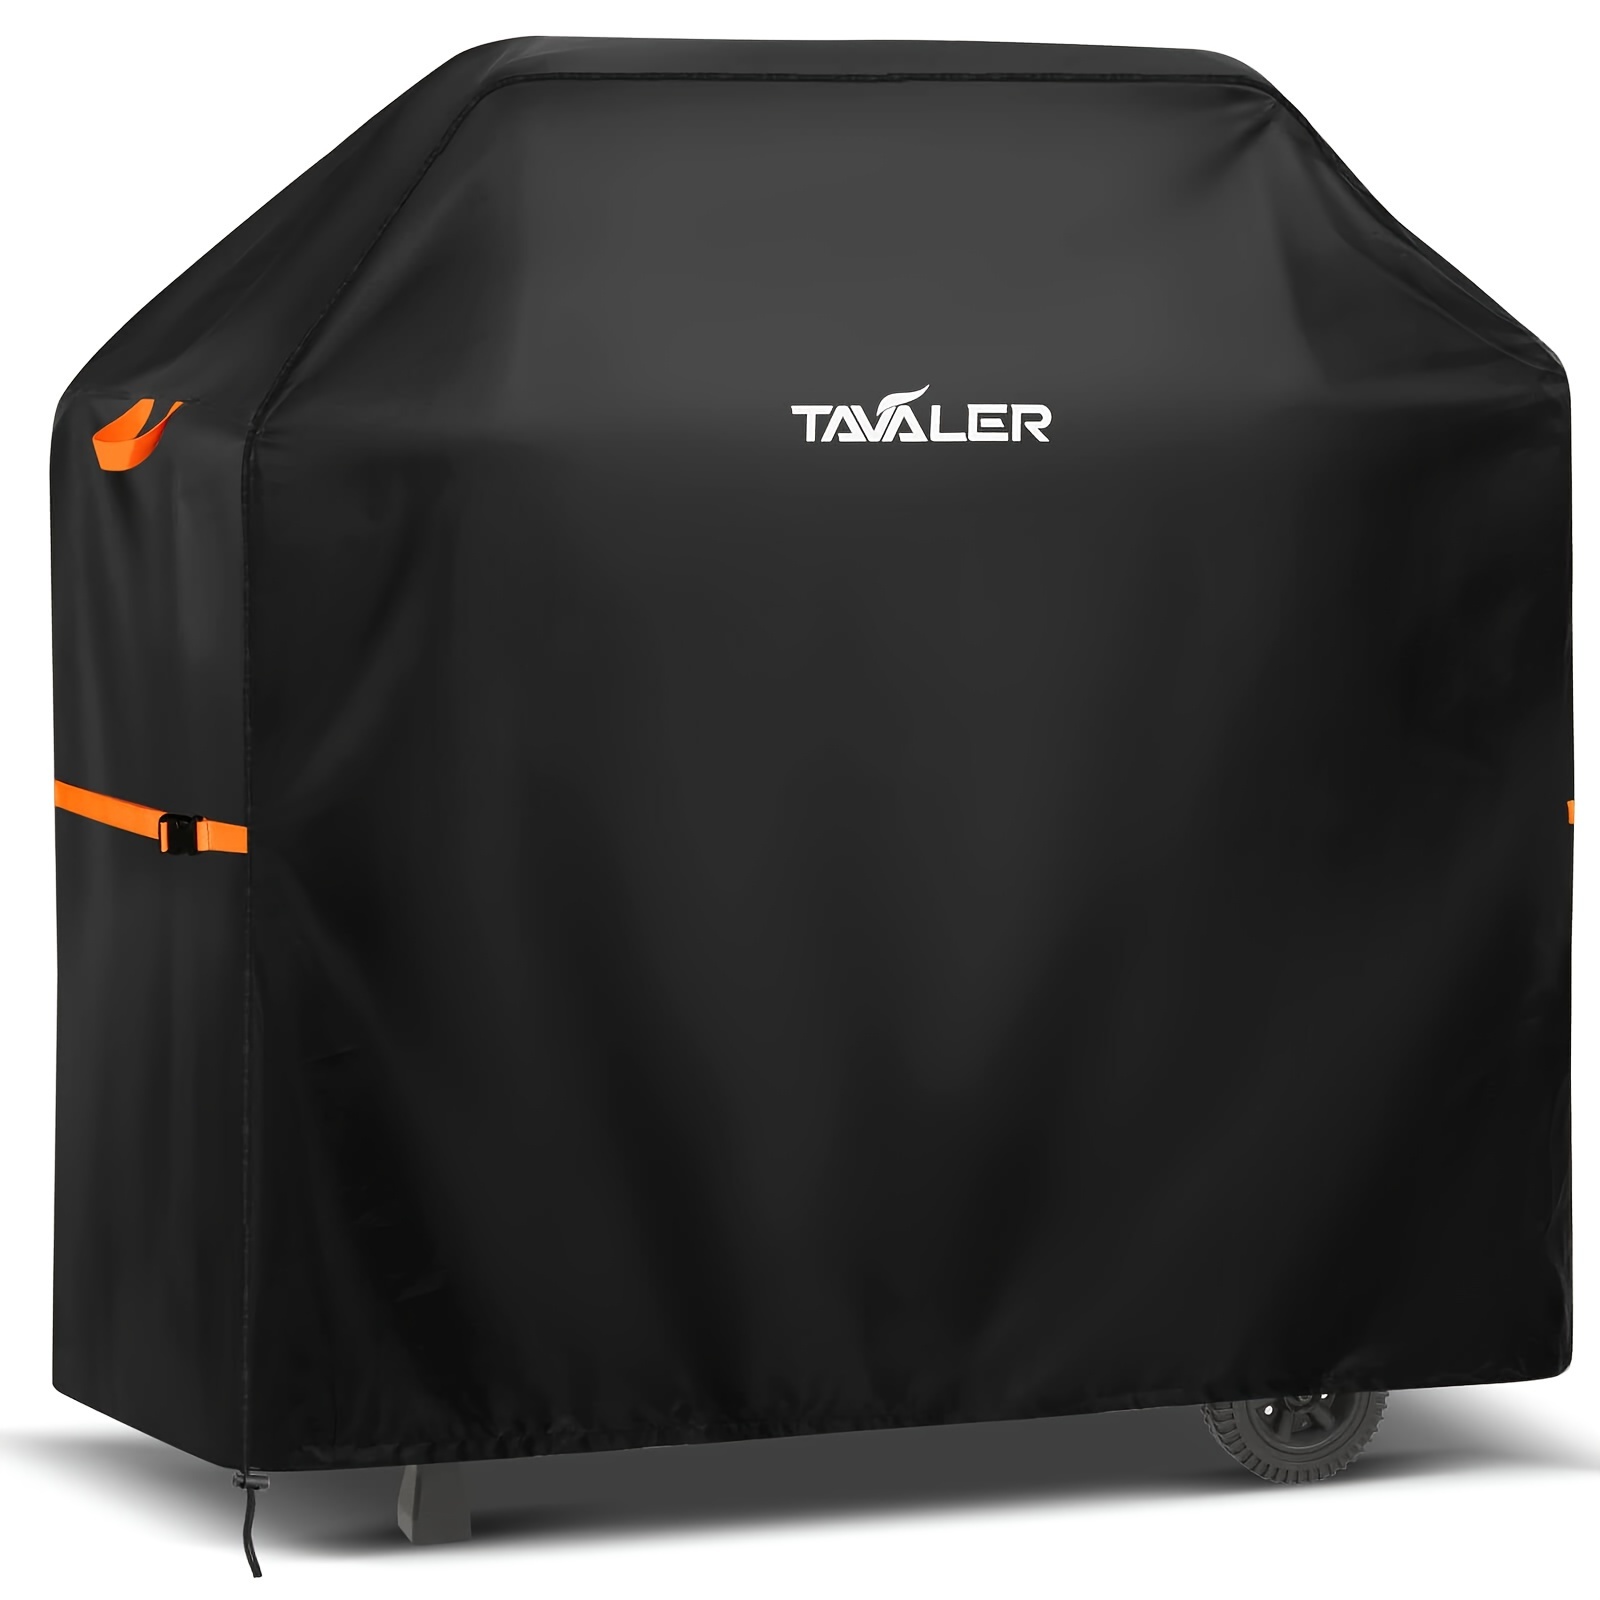 

Tavaler Heavy-duty Grill Cover - 420d Oxford Fabric Waterproof & Tear-resistant Bbq Cover With Drawstring Closure - Uv-resistant - Fits Weber, Brinkmann, Outdoor Gas Grills (4 Sizes)